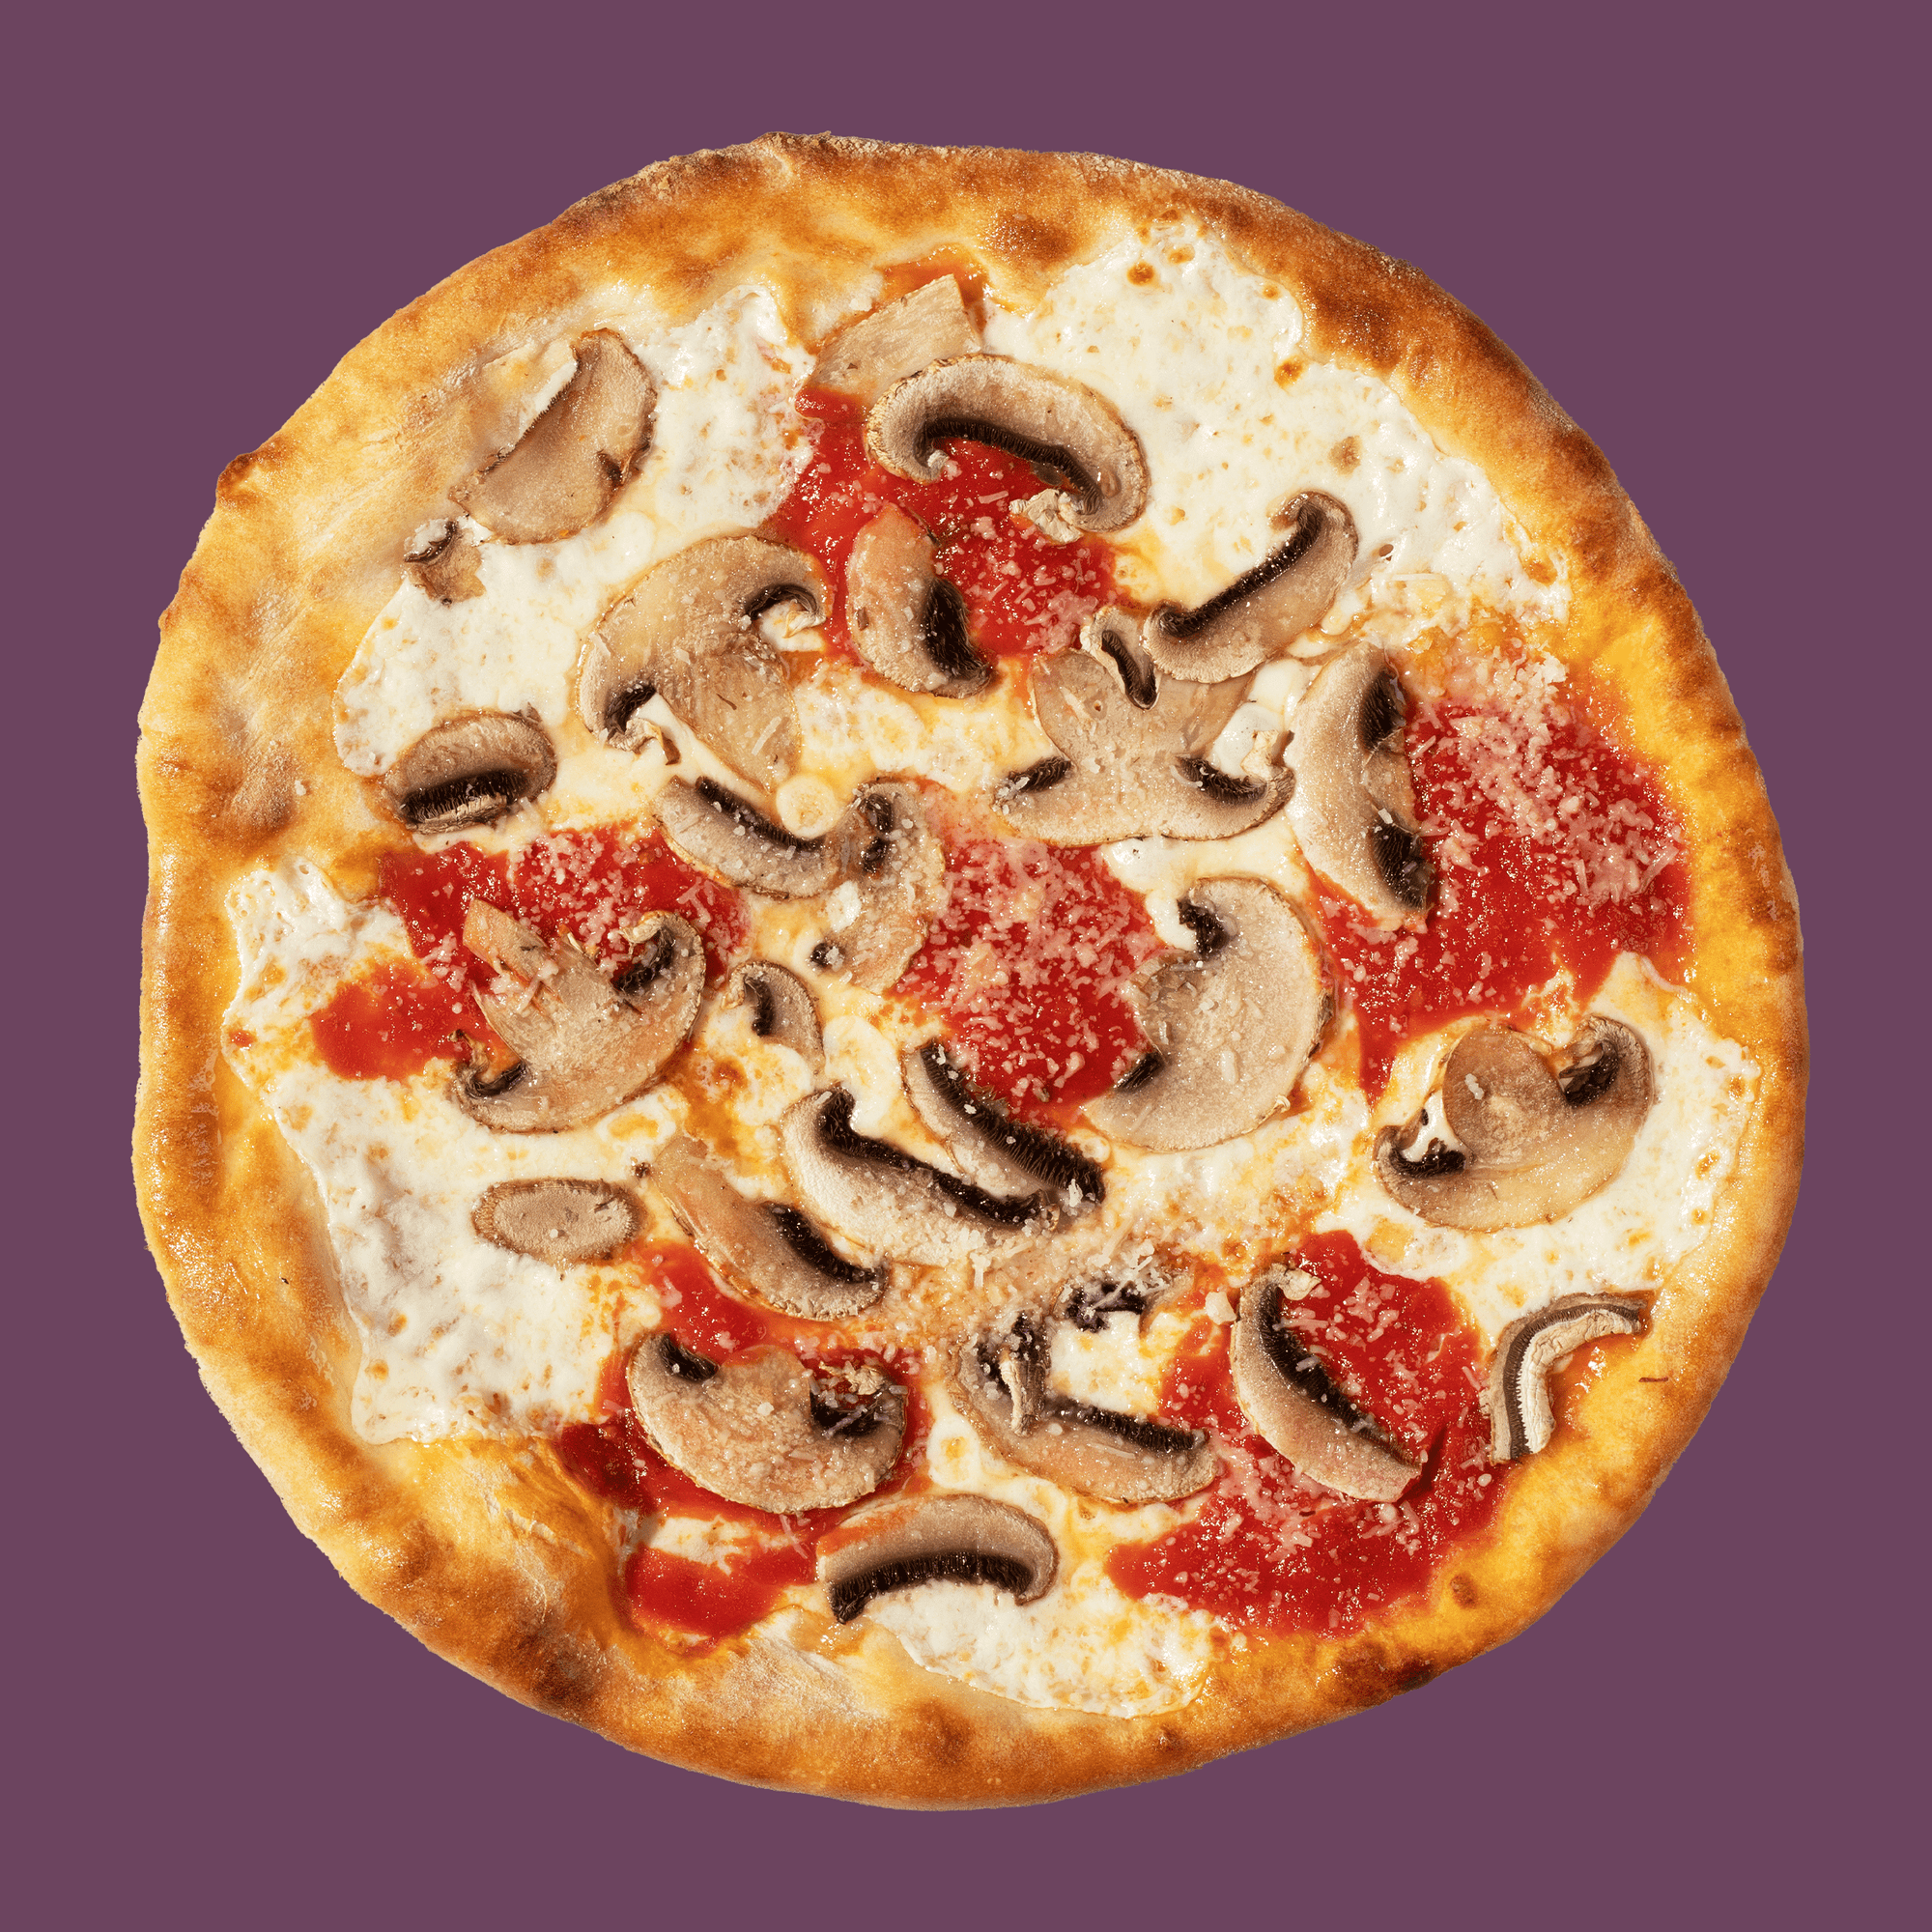 Coal Oven Mushroom with White Truffle Oil Pizza Pie 10" (4 Pies)